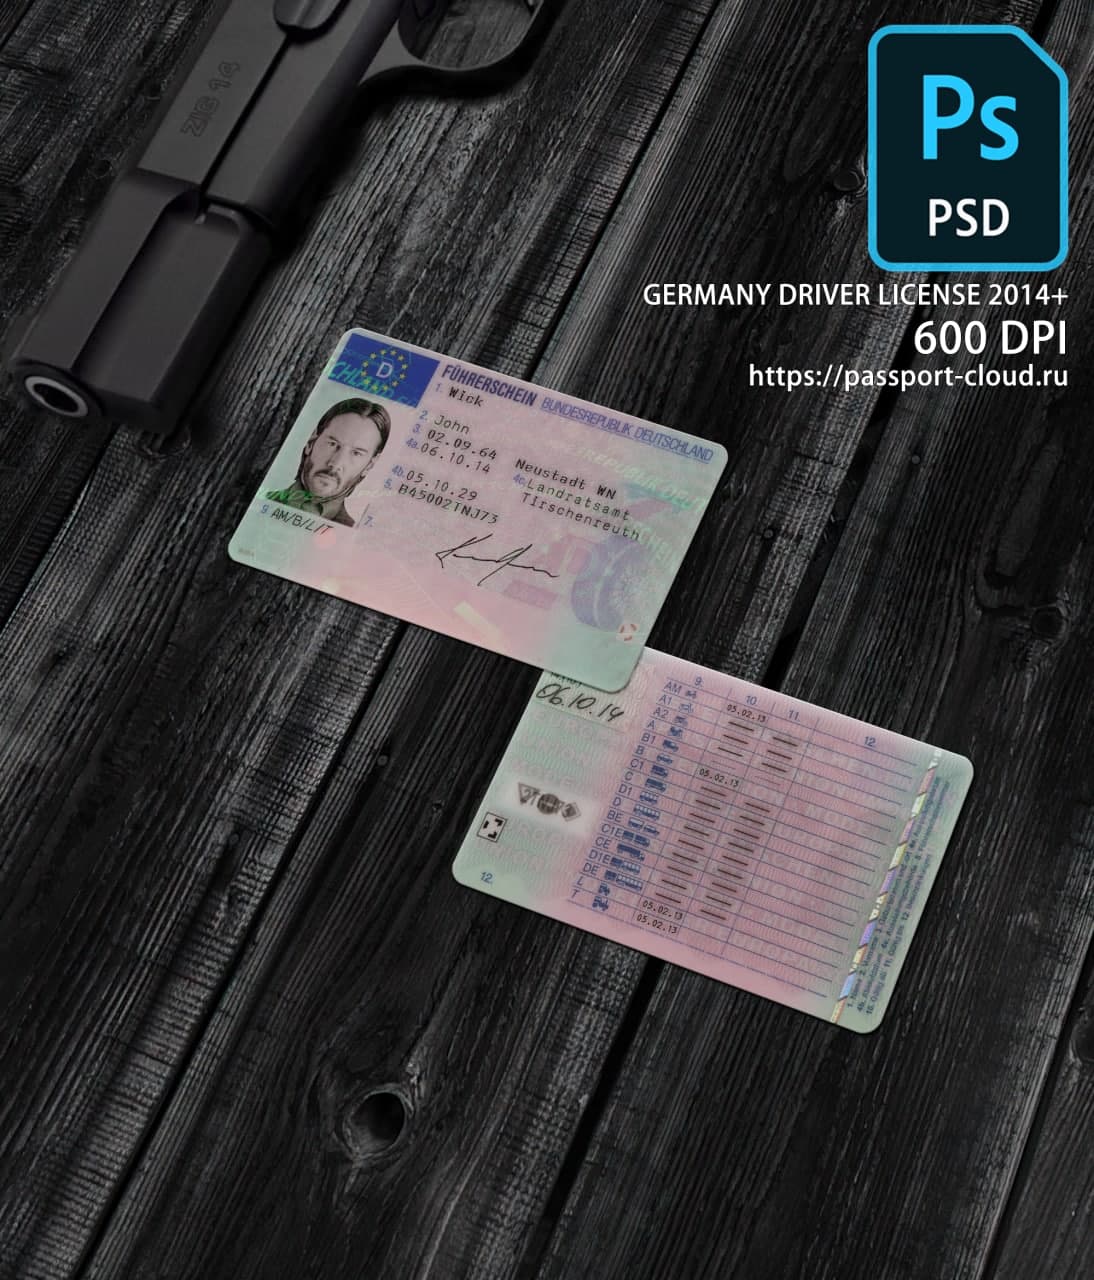 Germany Driver License 2013+1